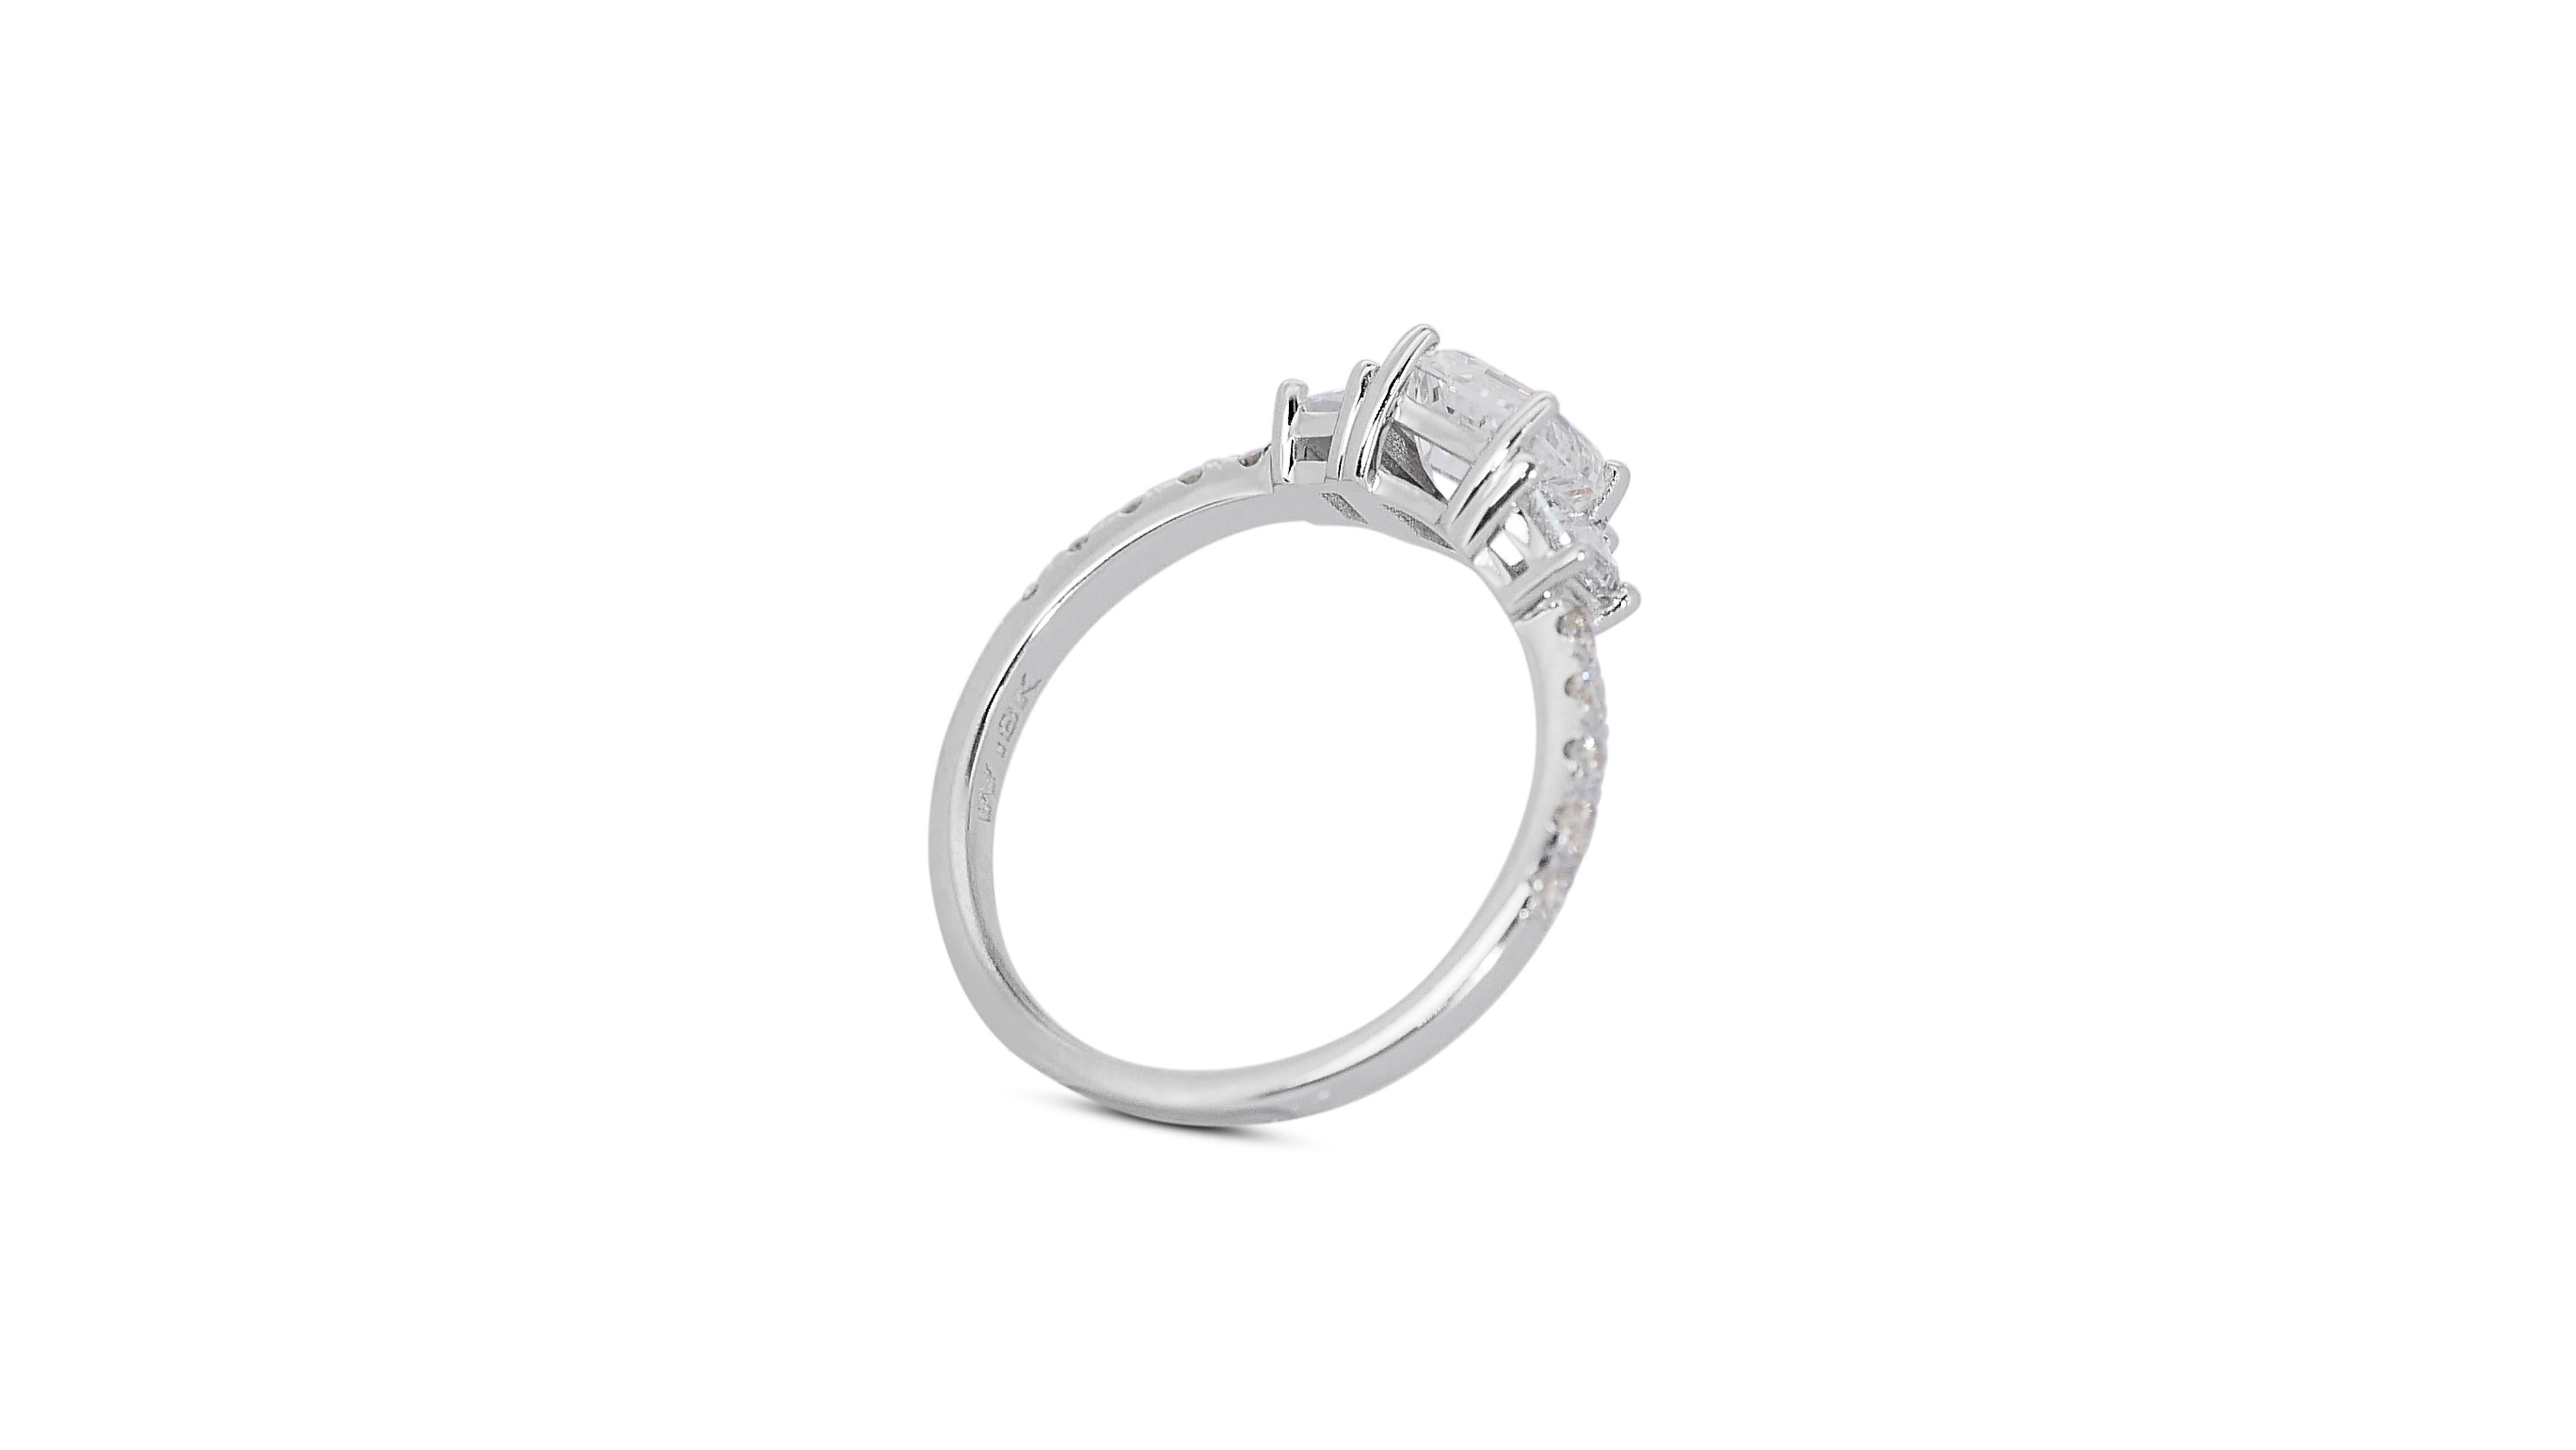  Stunning 18 kt. White Gold Ring with 1.71 ct Total Natural Diamonds - GIA Cert For Sale 6